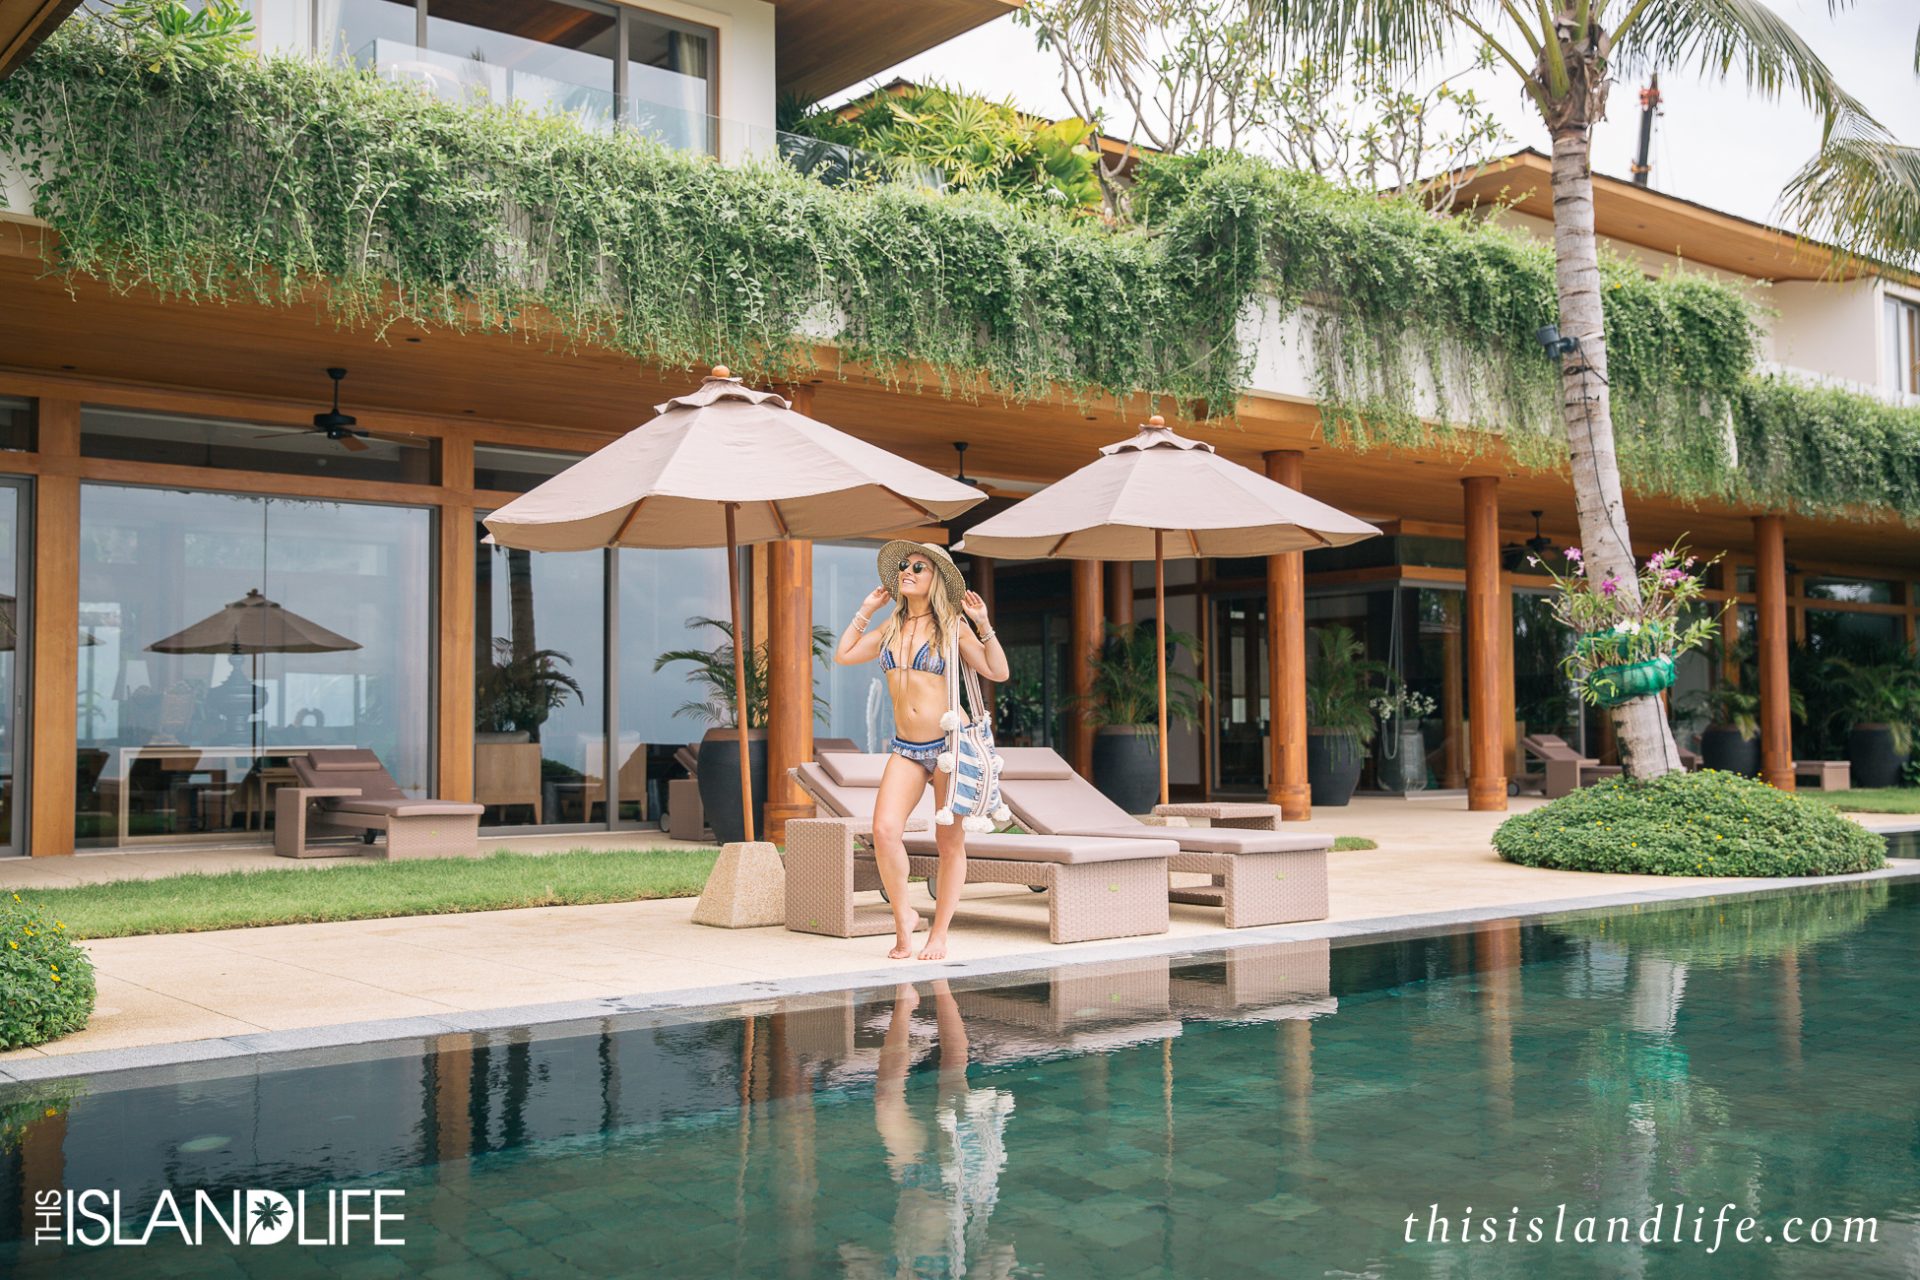 This Island Life | One luxurious week on the island of Phuket with Villa Getaways